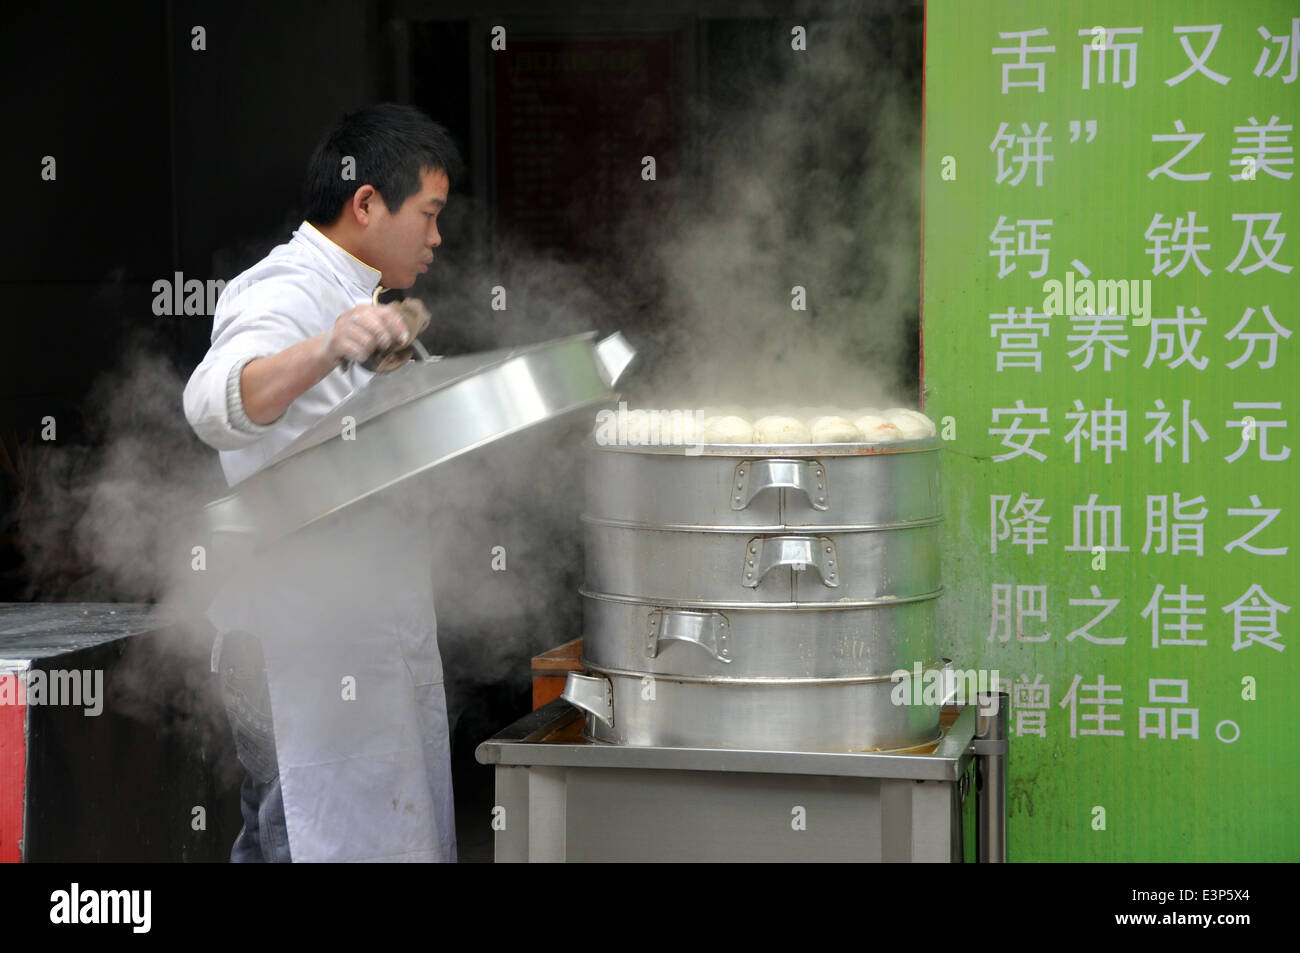 PENGZHOU, CHINA: Cook lifts the cover off a stack of freshly steamed bao zi buns Stock Photo